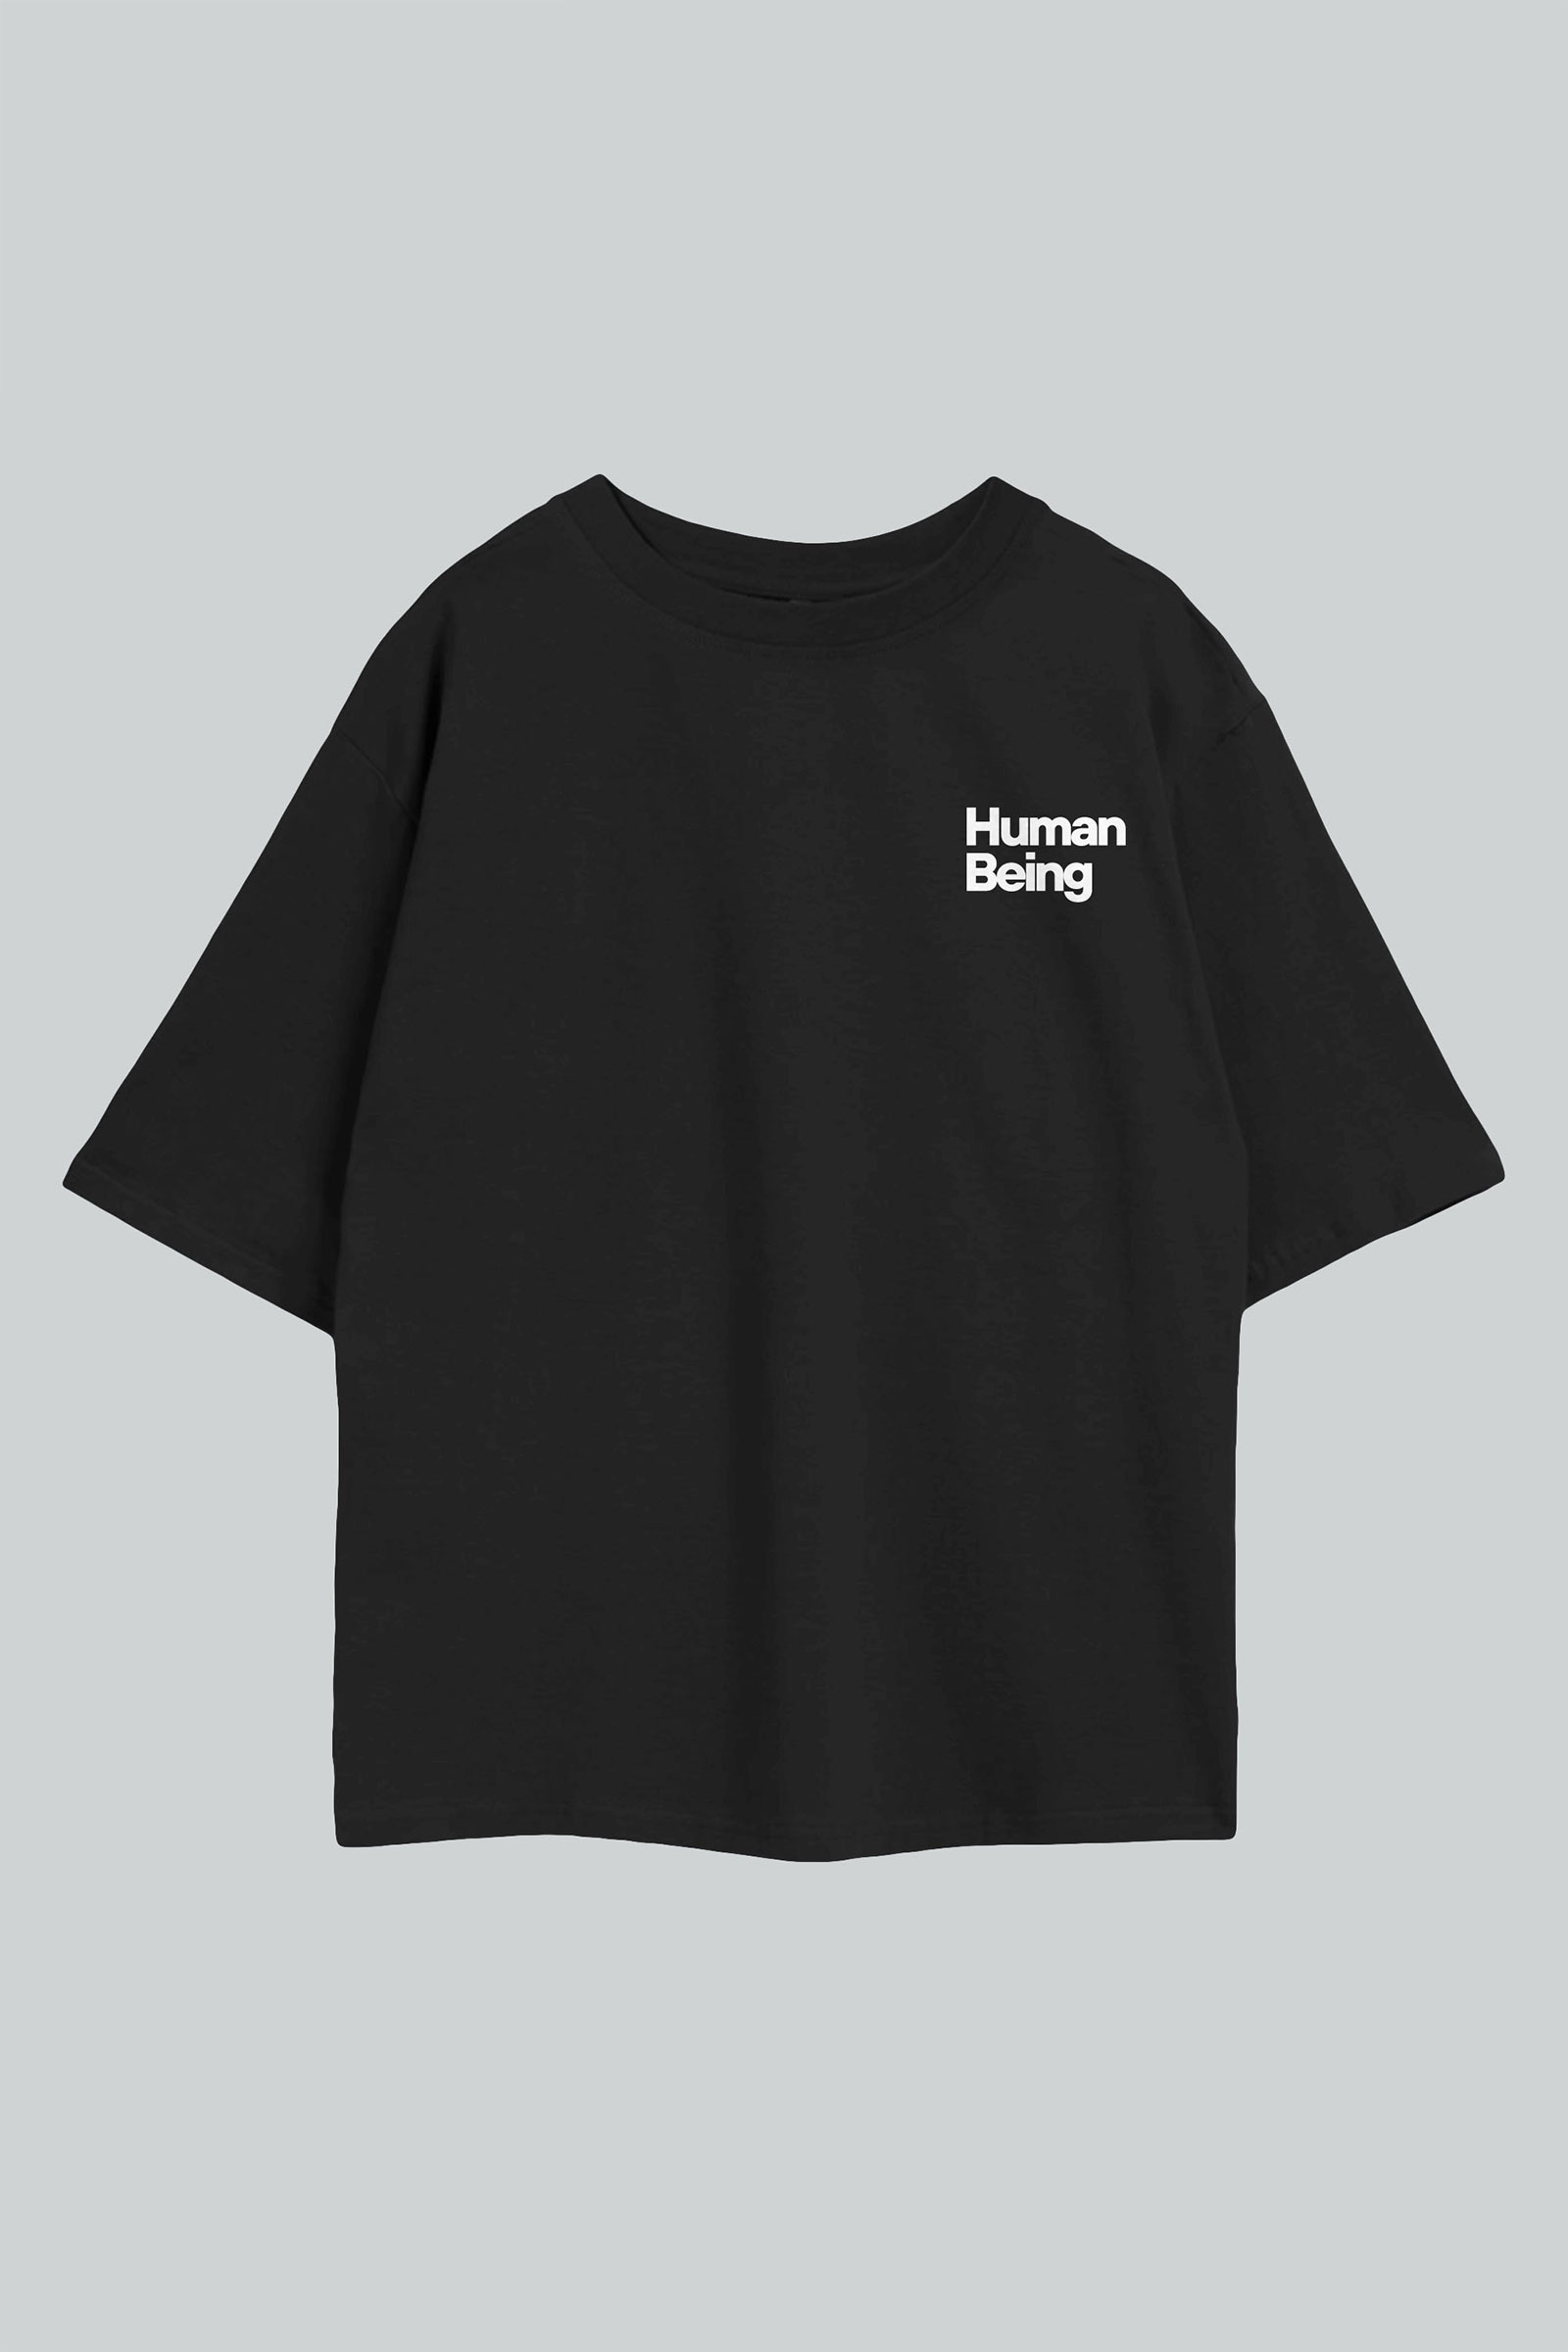 Human Being Black Oversize T-Shirt Front